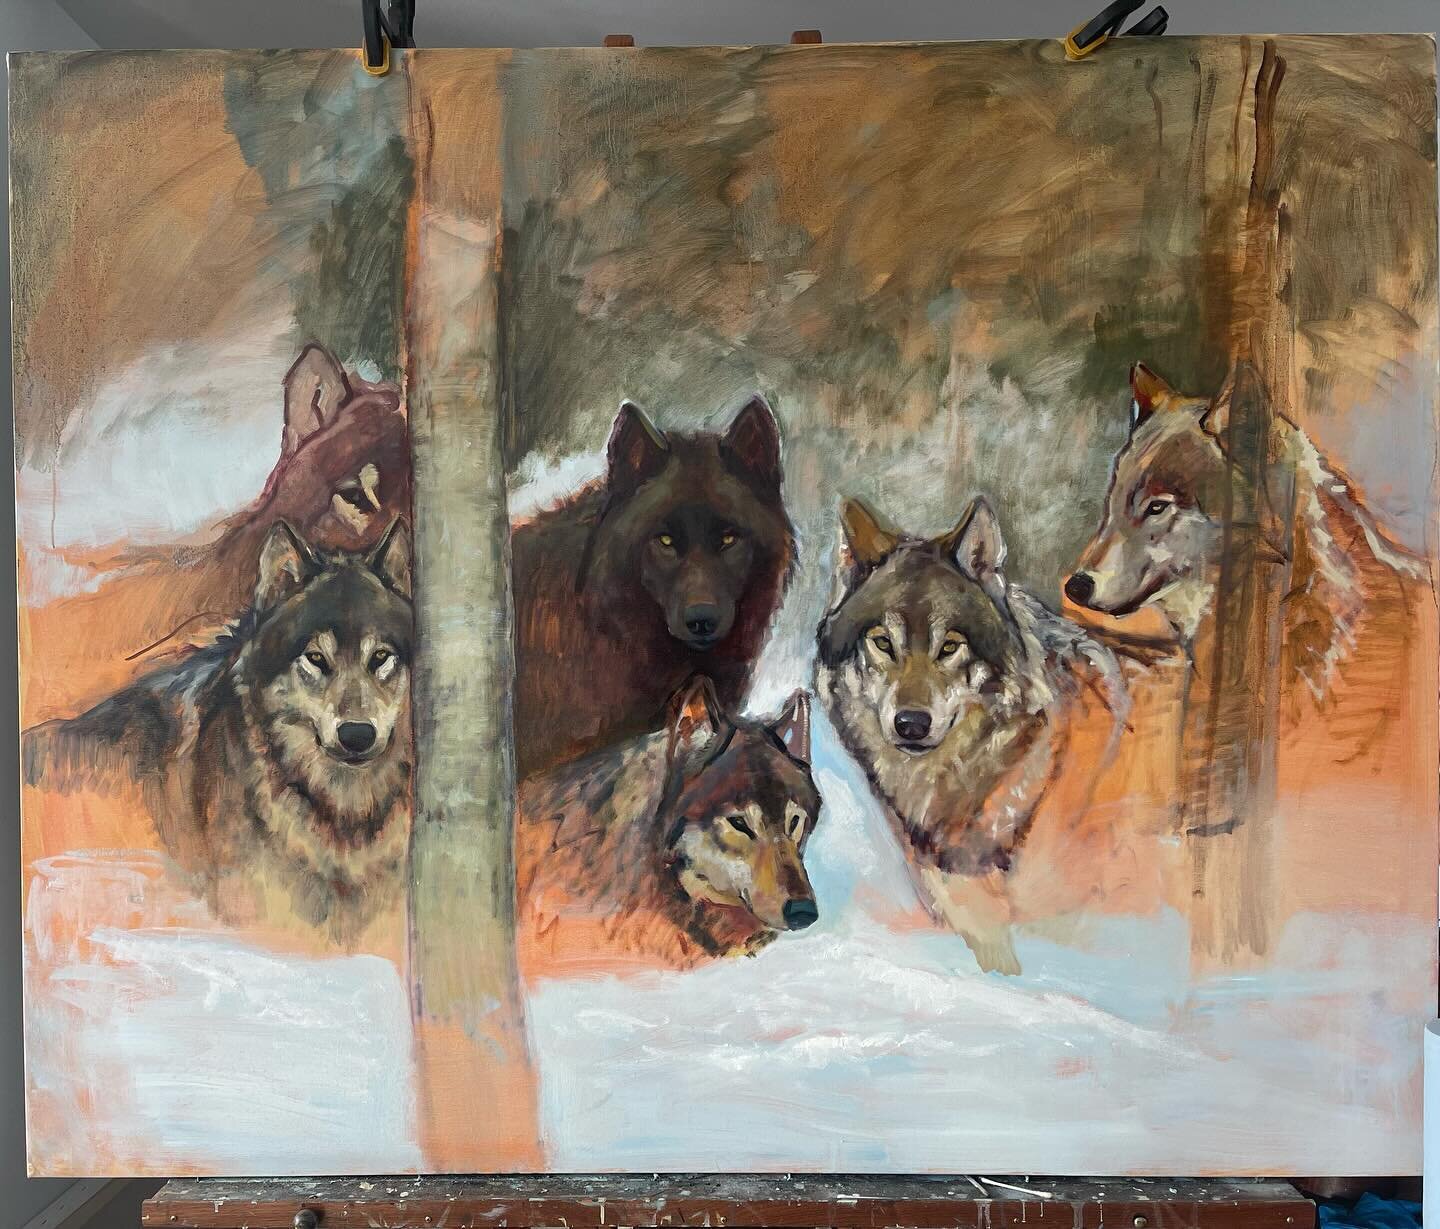 These wolves just asking to be painted. I couldn&rsquo;t stop even if I wanted to. The energy keeps me going and the paint has been flowing effortlessly on the canvas! Very smooth process on this large piece! So grateful for the experience ! So much 